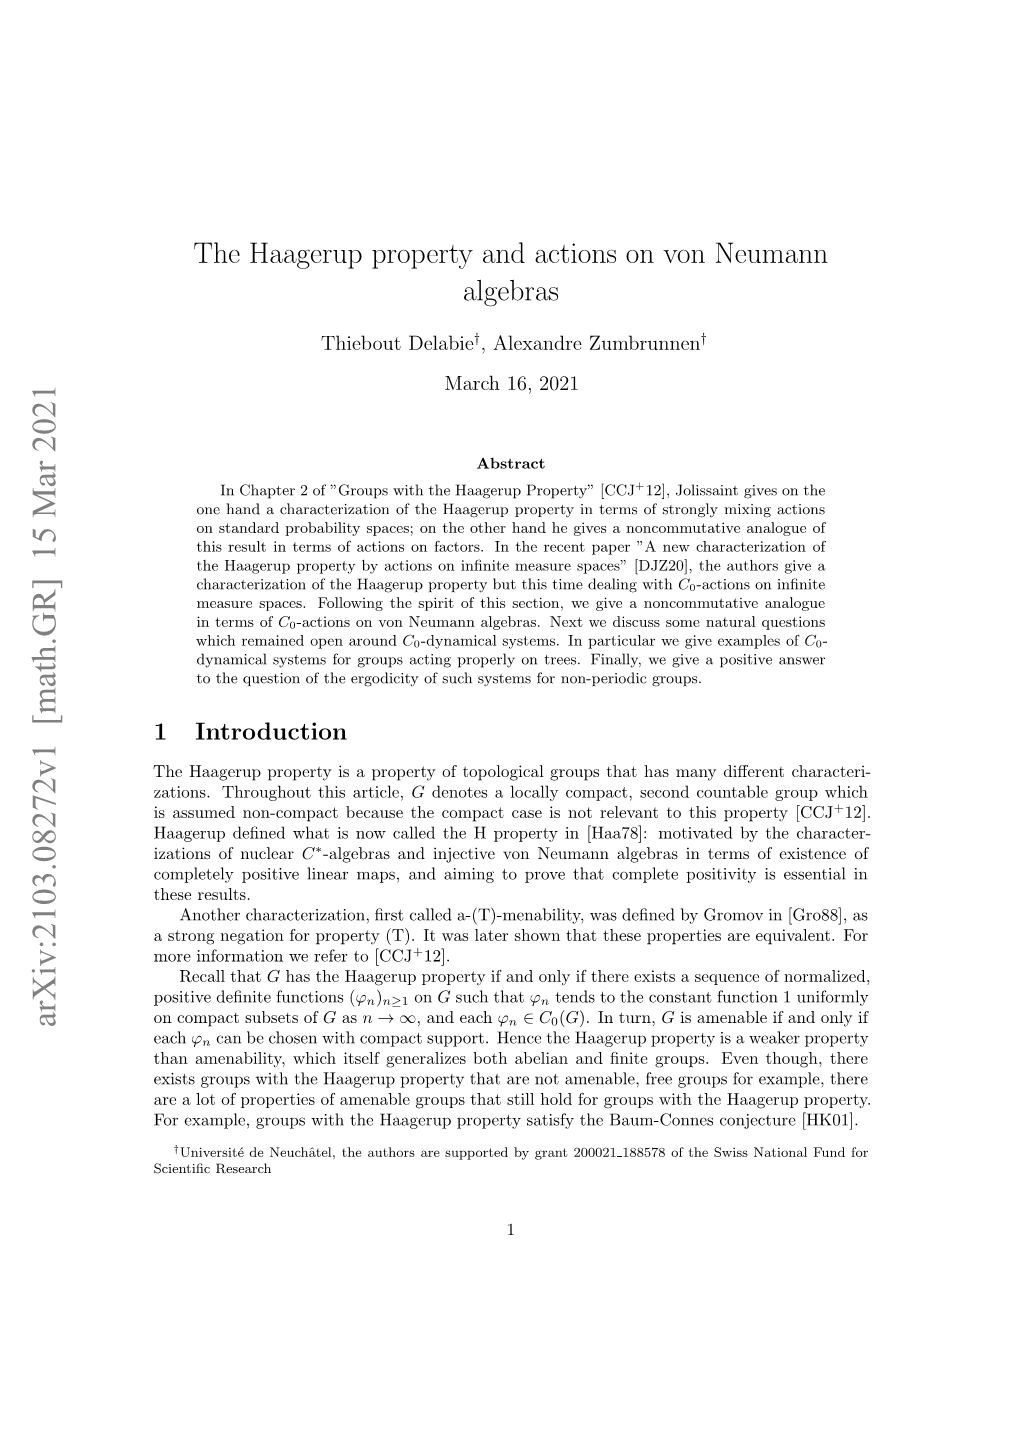 The Haagerup Property and Actions on Von Neumann Algebras